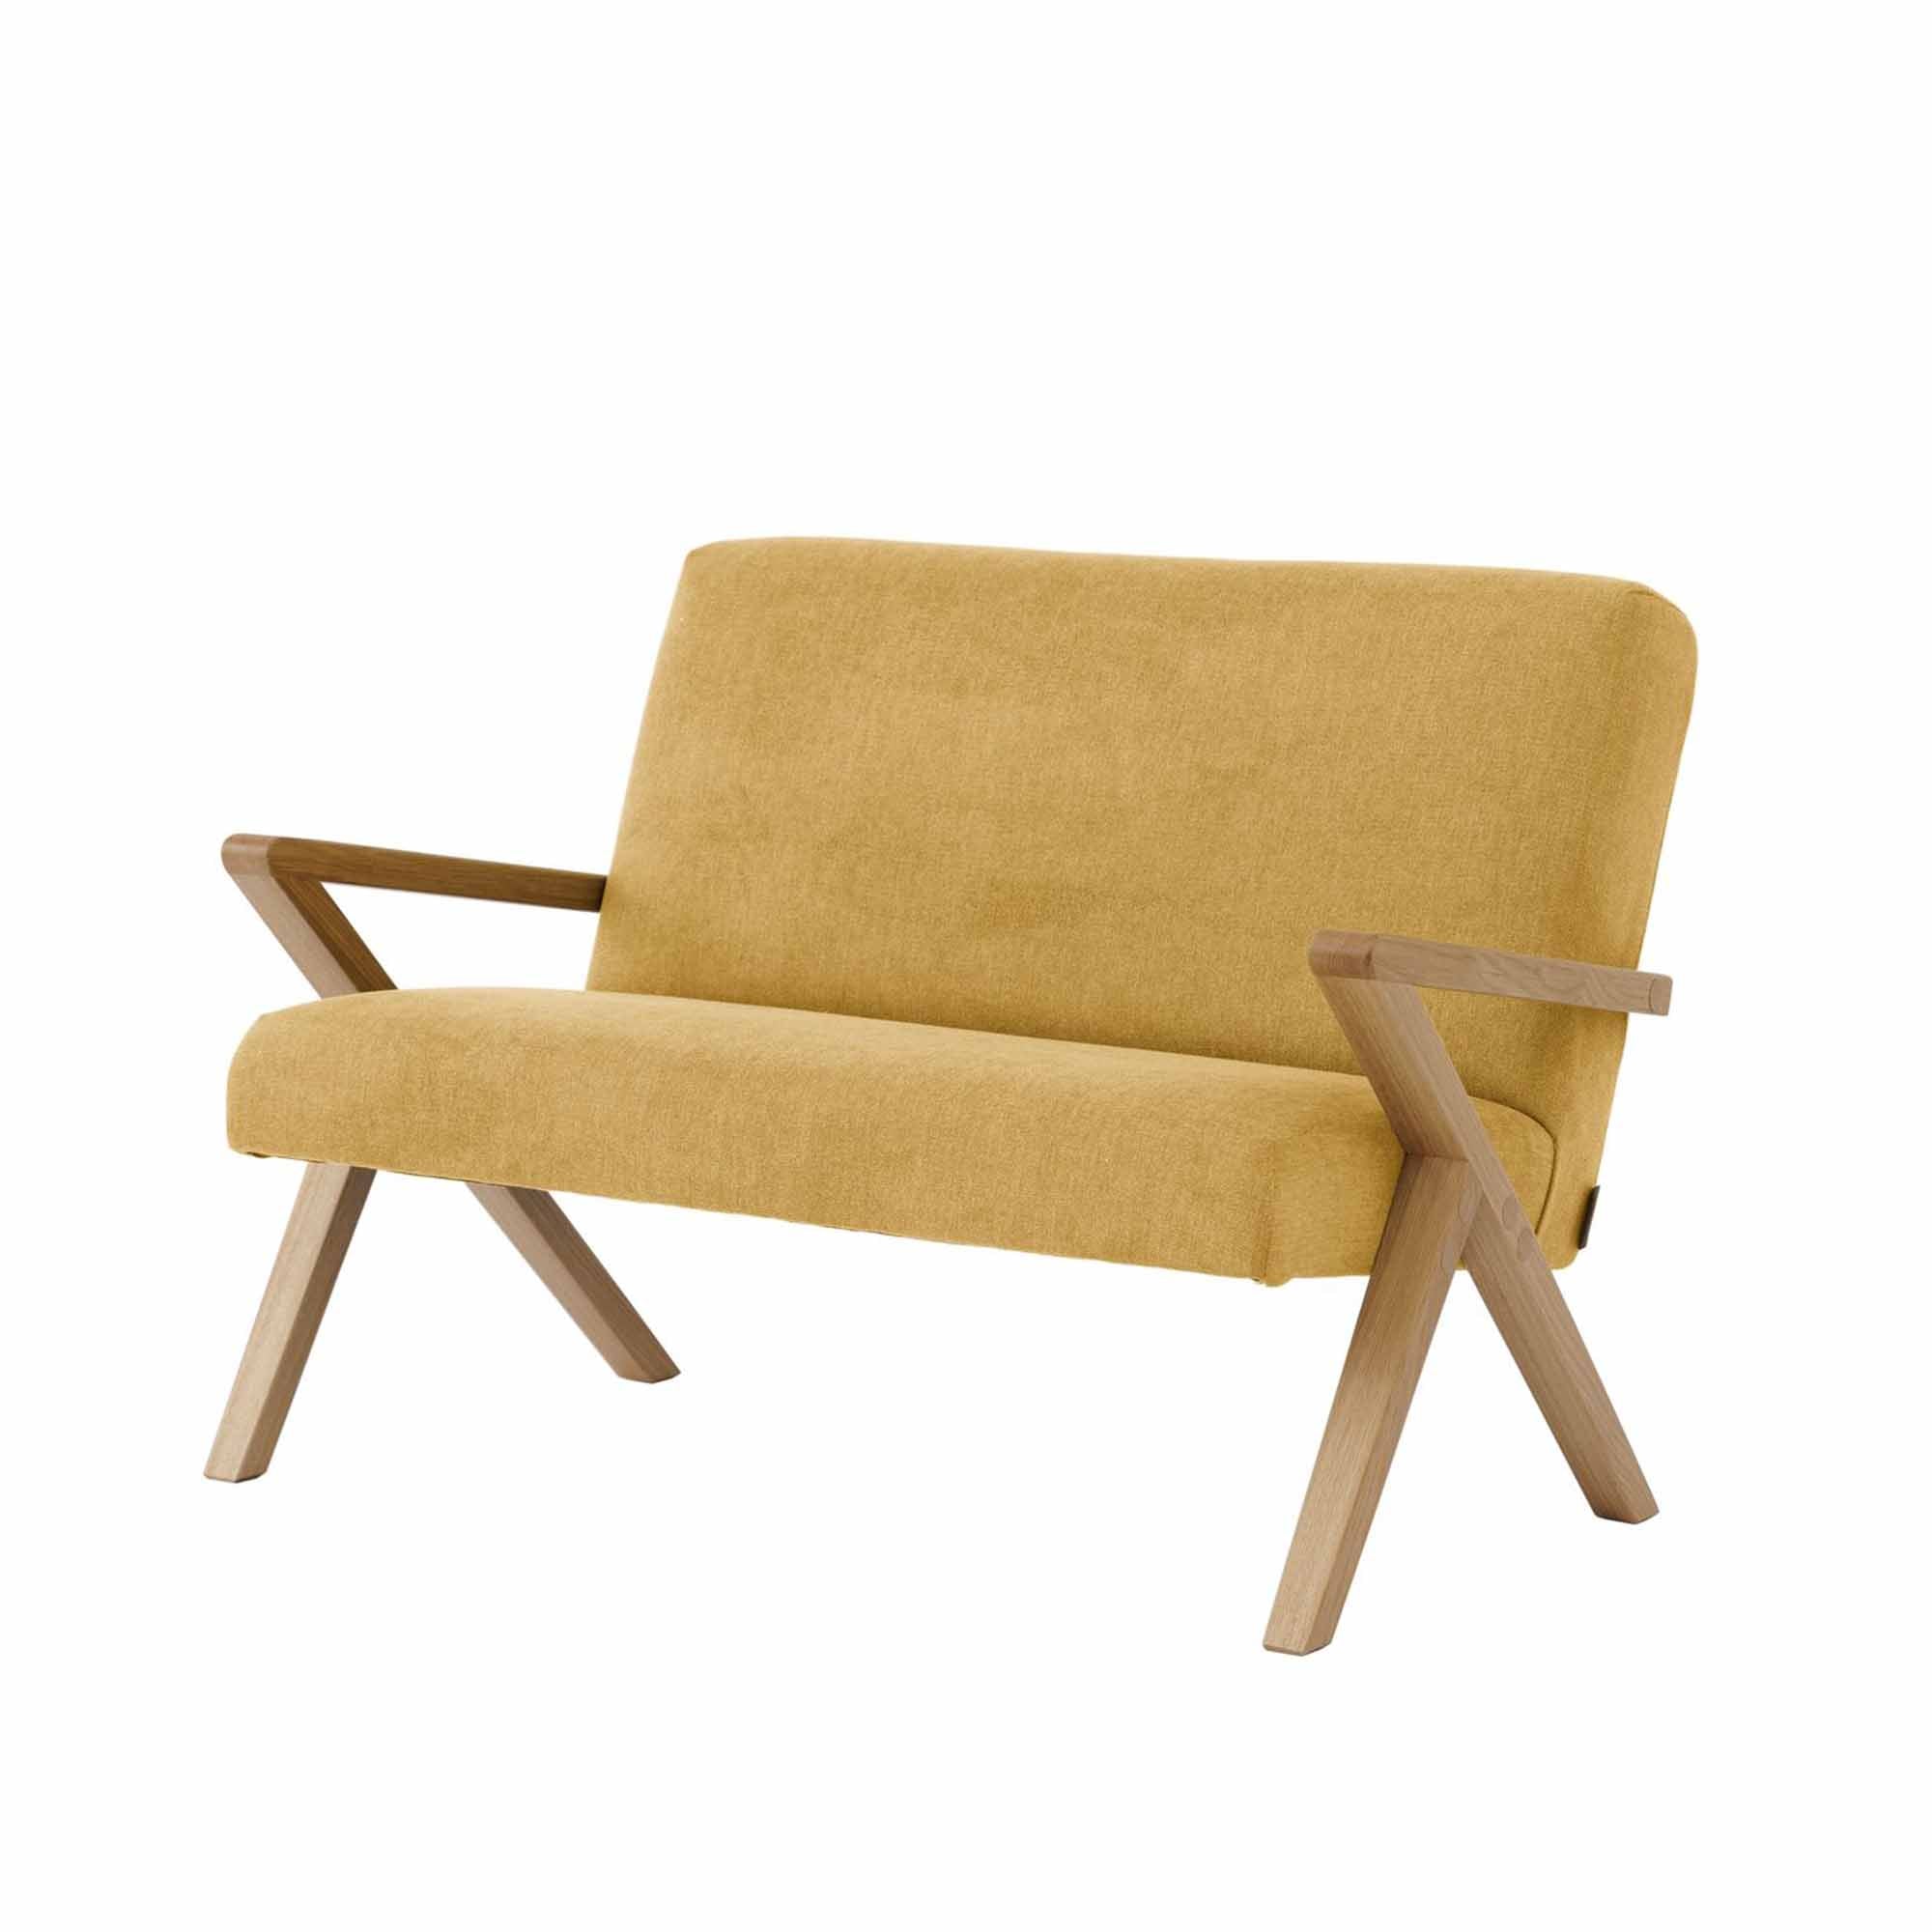  2-Seater Sofa, Oak Wood Frame, Natural yellow fabric, half-side view